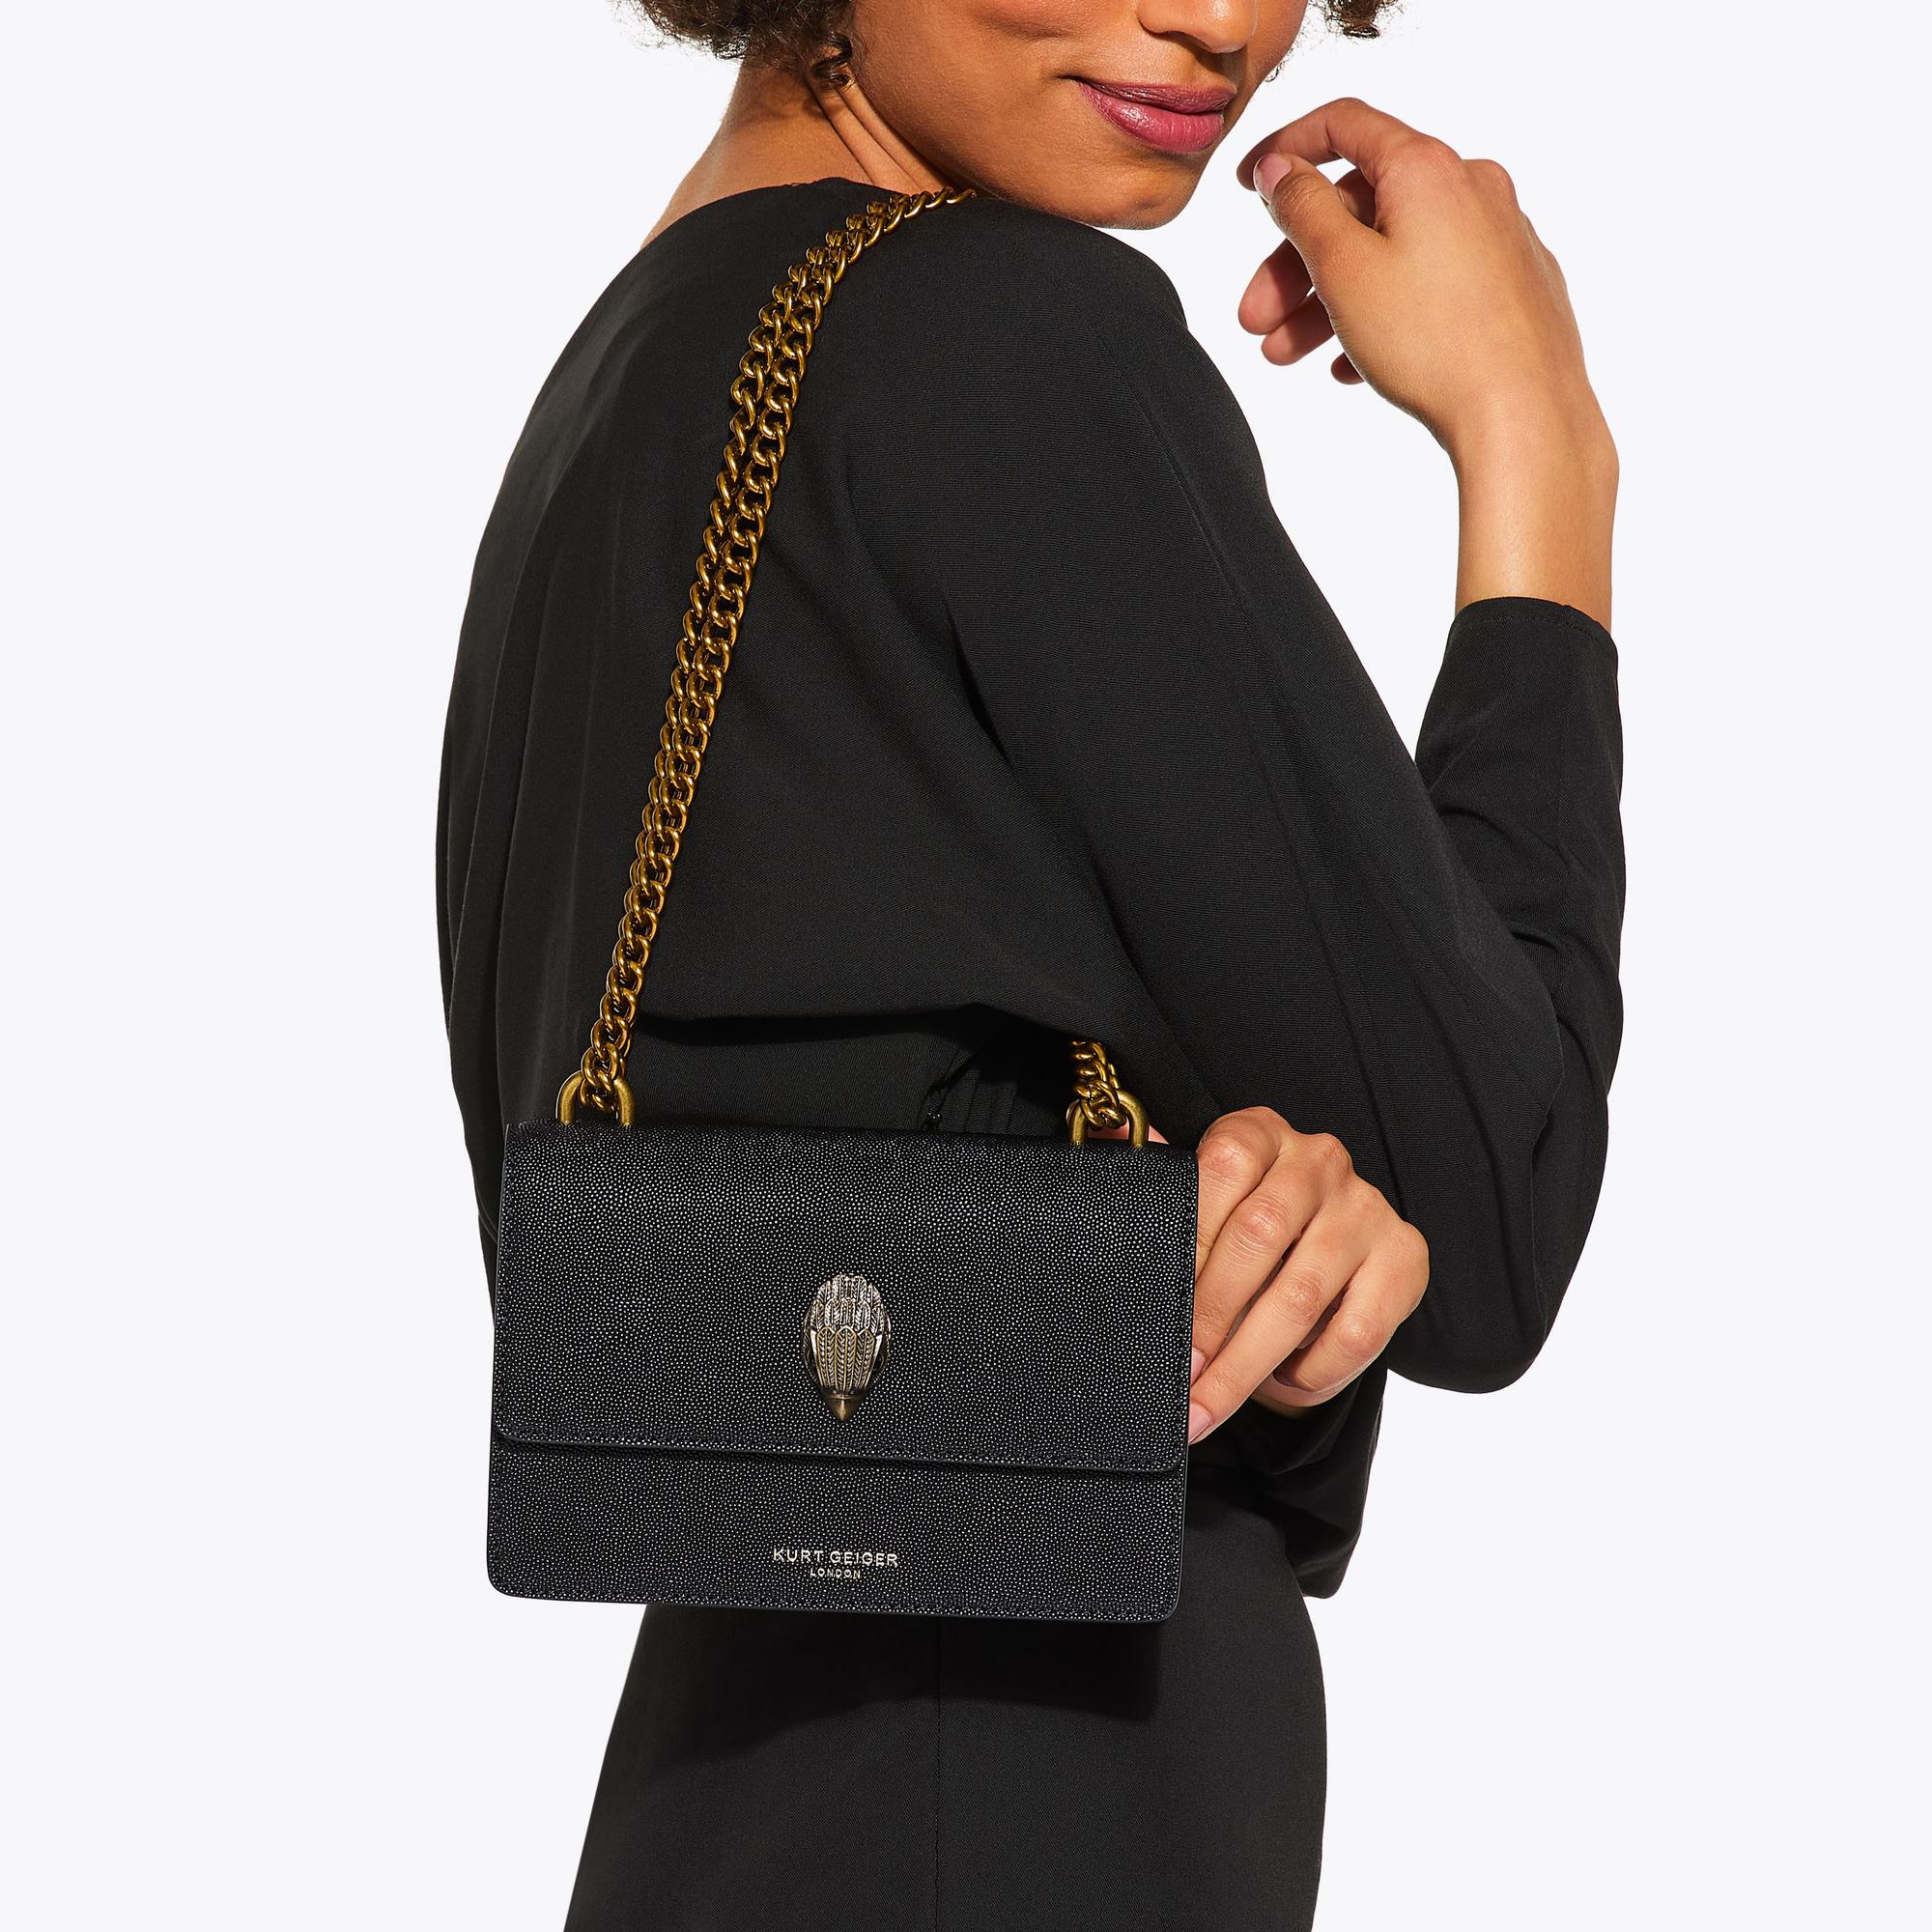 Leather crossbody bag with all-over embossed eagle